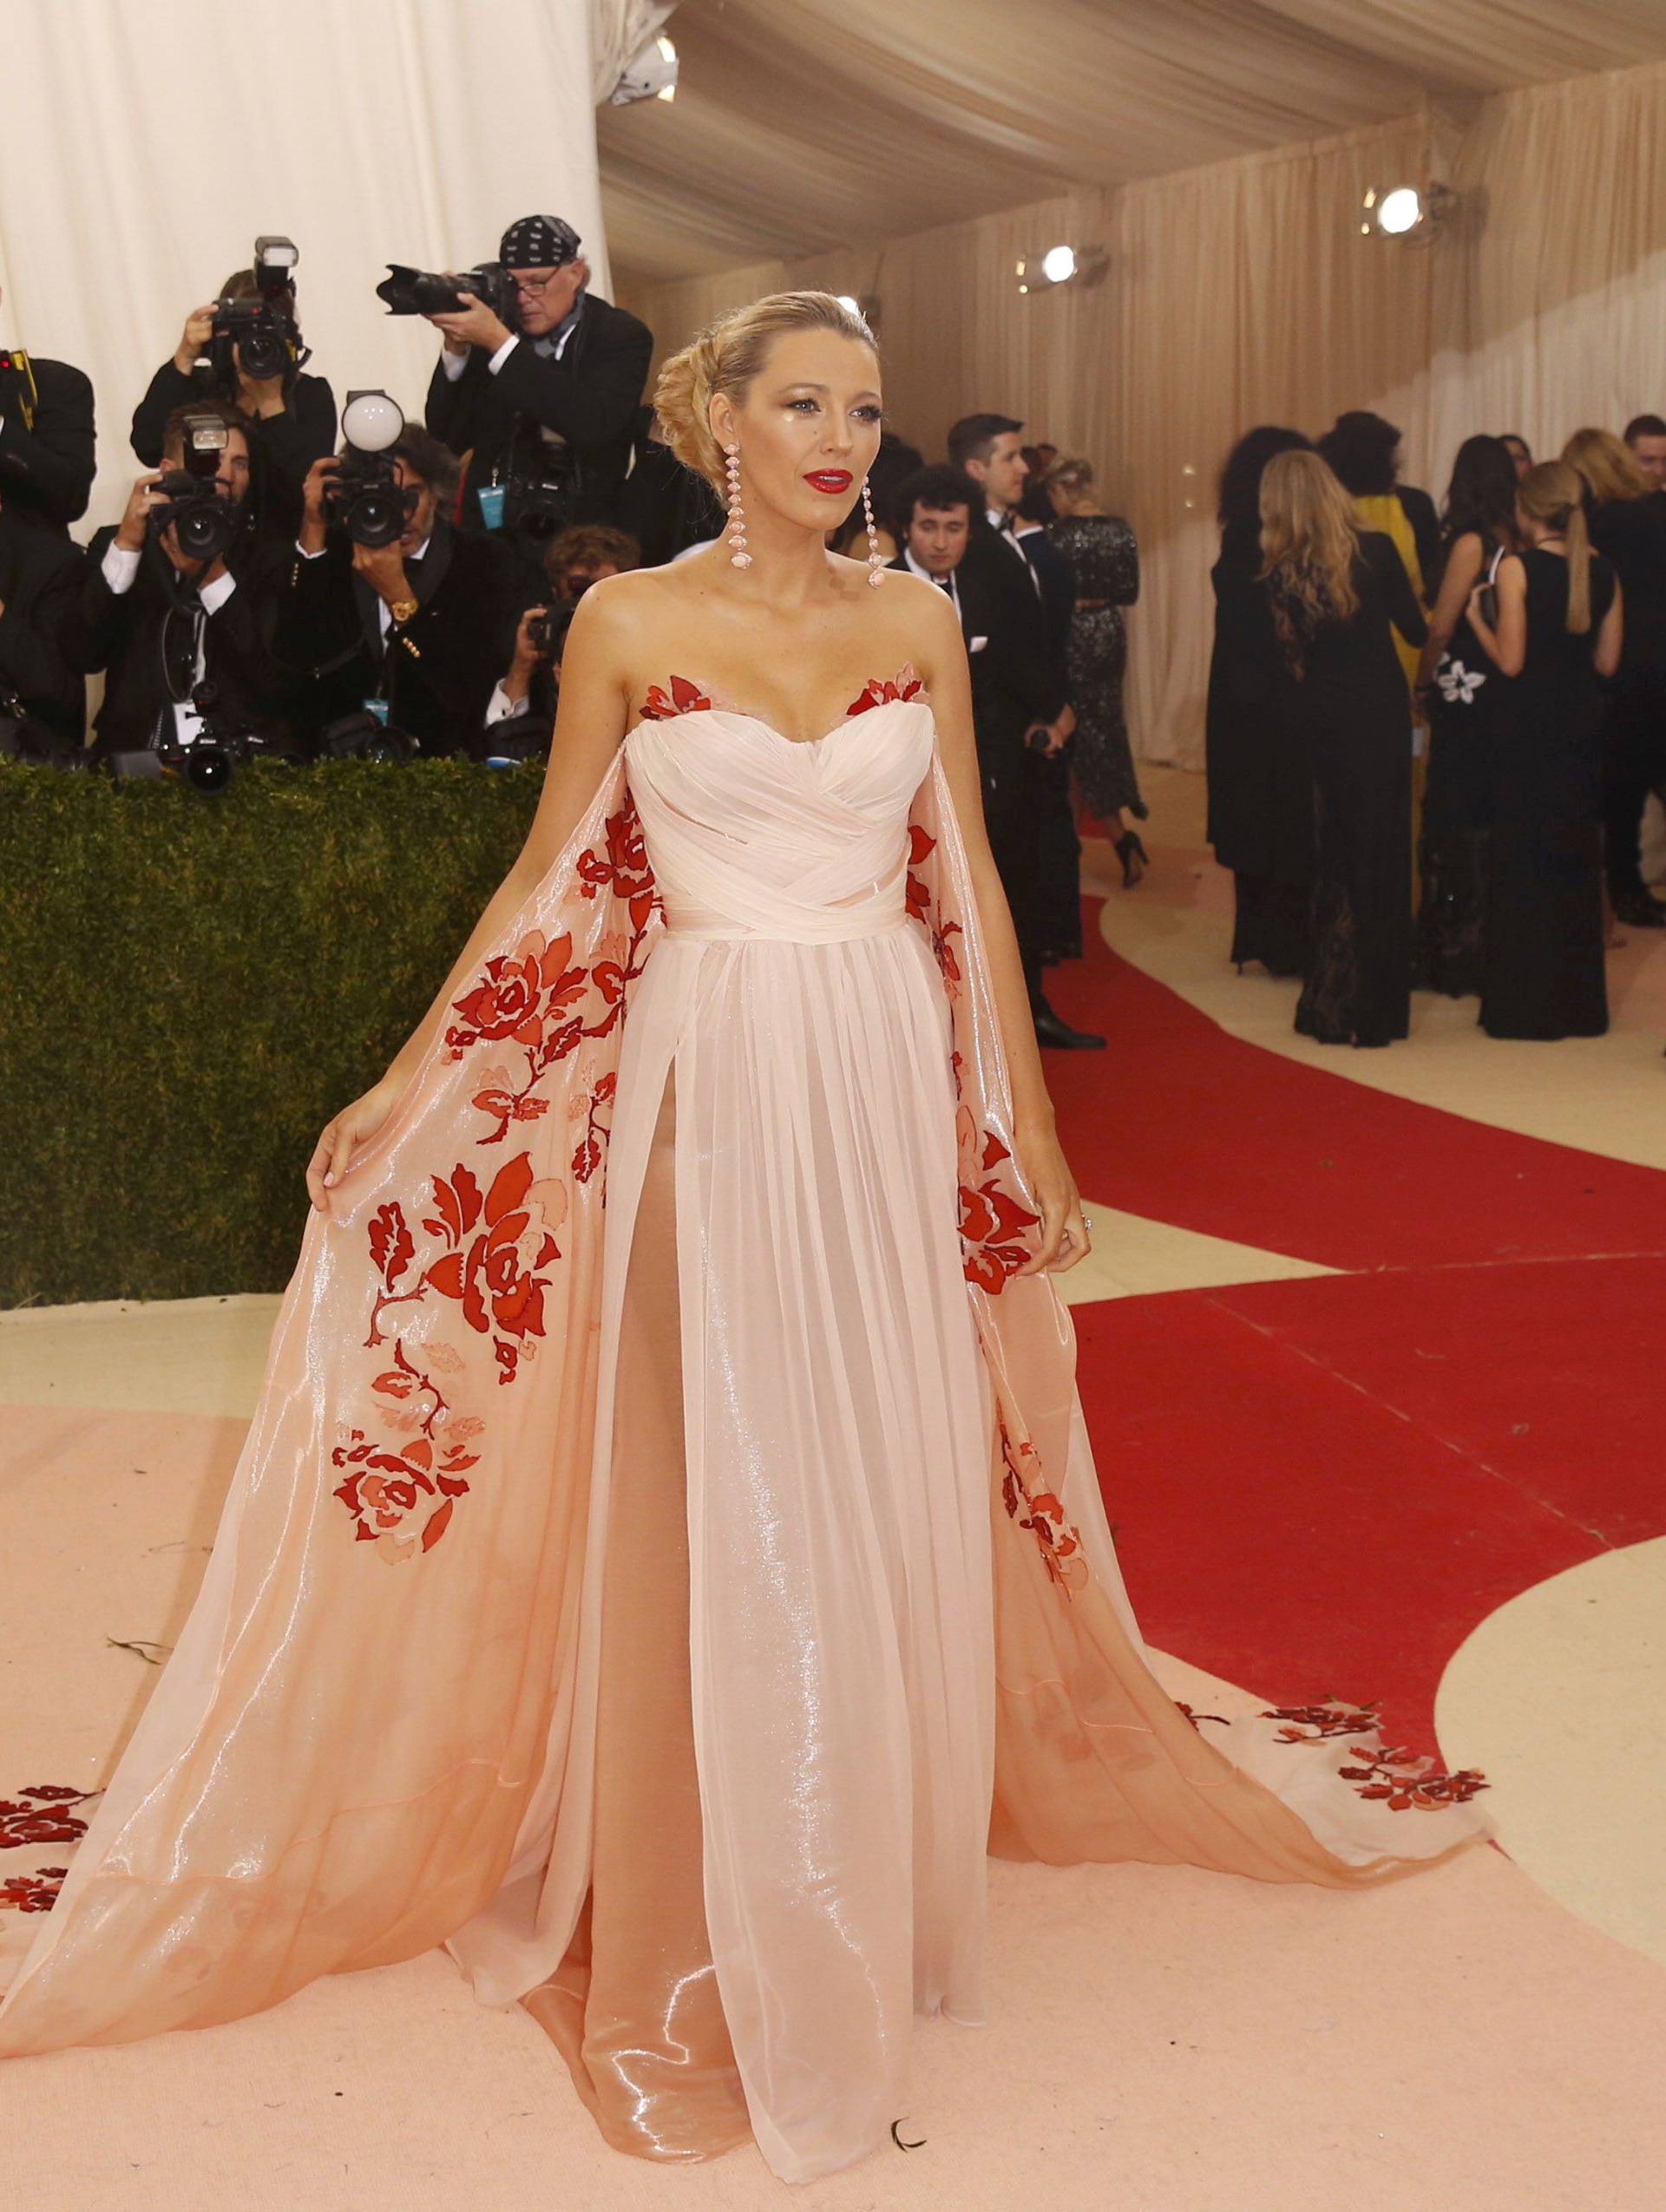 Actress Blake Lively arrives at the Met Gala in New York